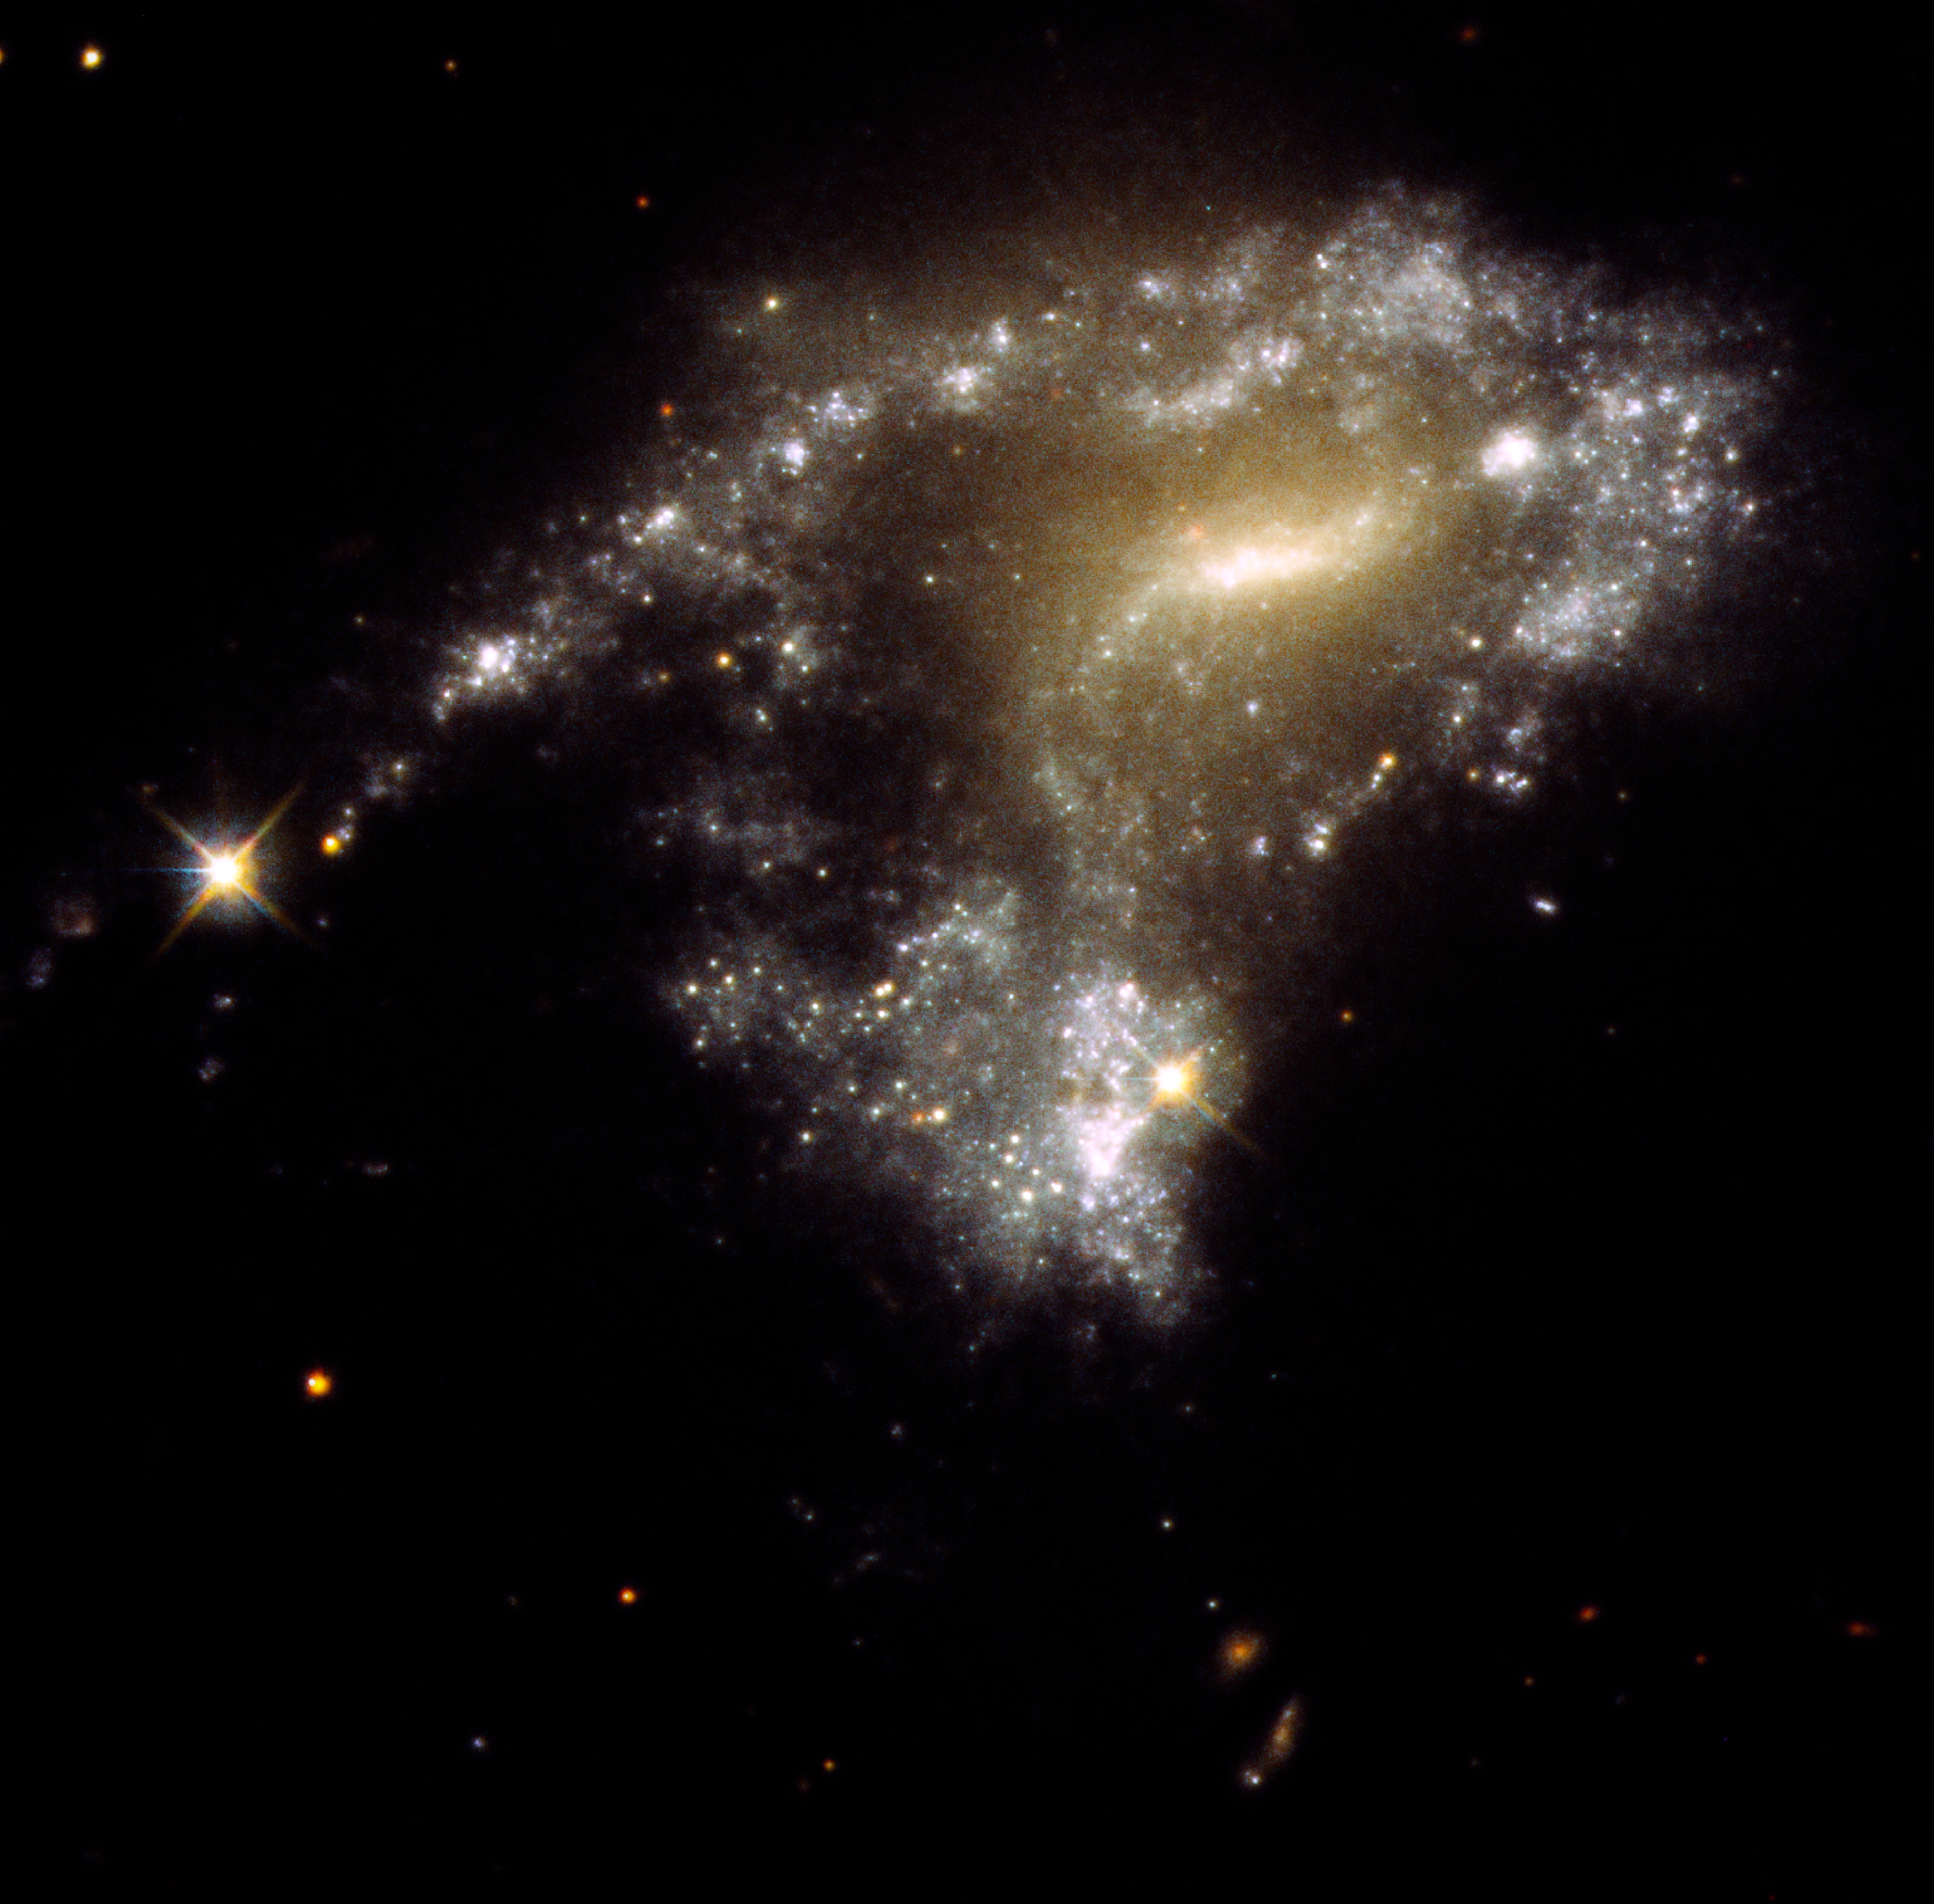 This is a picture of a galaxy with a peculiar S-shape. It has a bright milky-white core at the center. Twin arms of blue stars wrap around the core. One arm looks particularly stretched out due to the gravitational tidal pull of a neighboring galaxy. Bright, young, whitish star clusters are strung along the arm like a string of pearls. They formed as a result of the collision process.